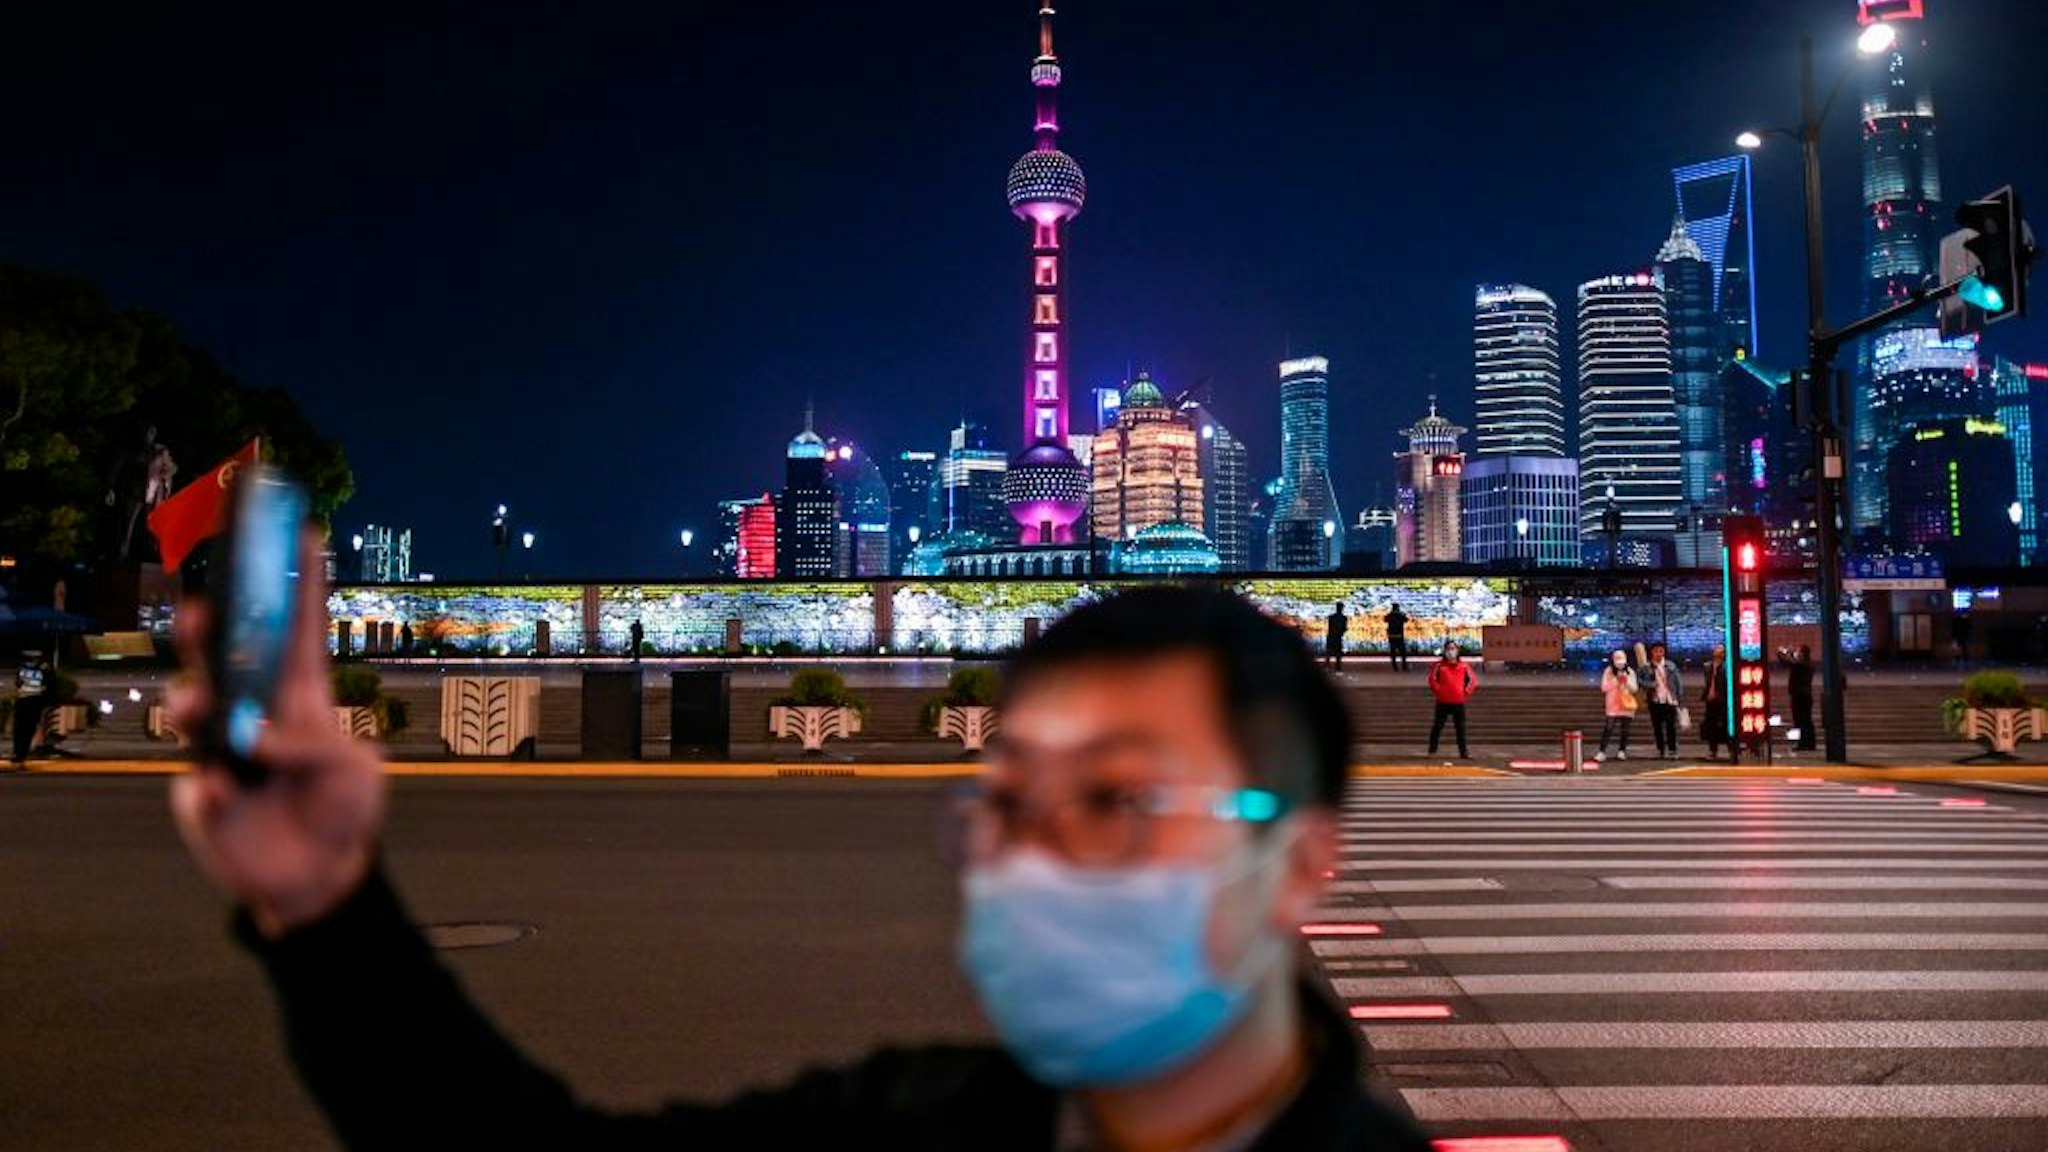 A man wearing a facemask as a preventive measure against the COVID-19 novel coronavirus takes a video of the Bund along the Huangpu River in Shanghai on March 24, 2020.